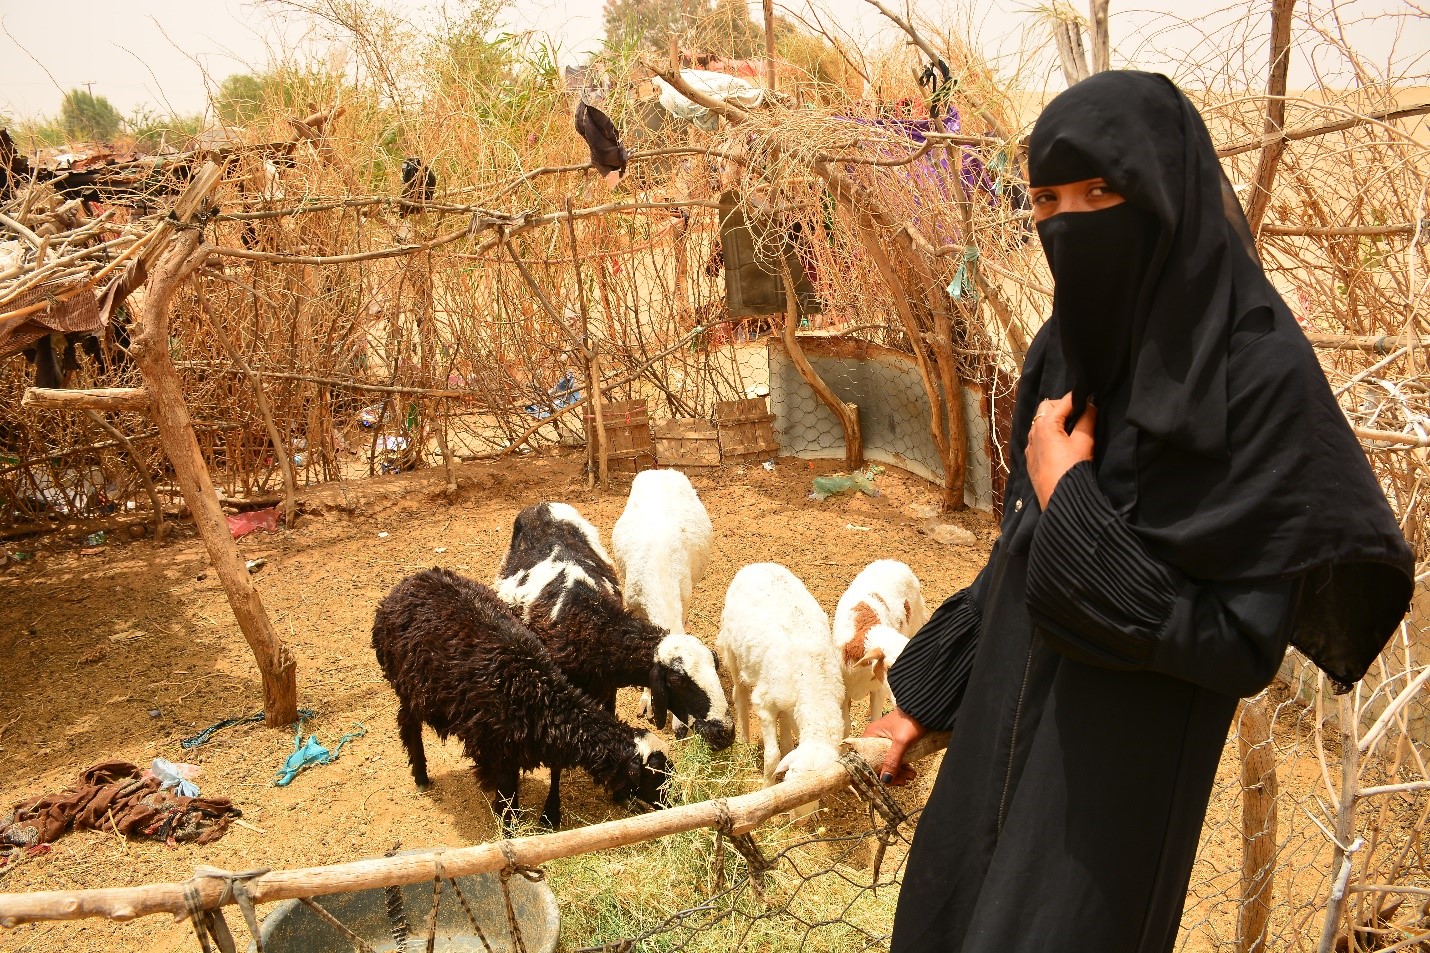 A woman in a black burka standing next to goats in a rural setting.